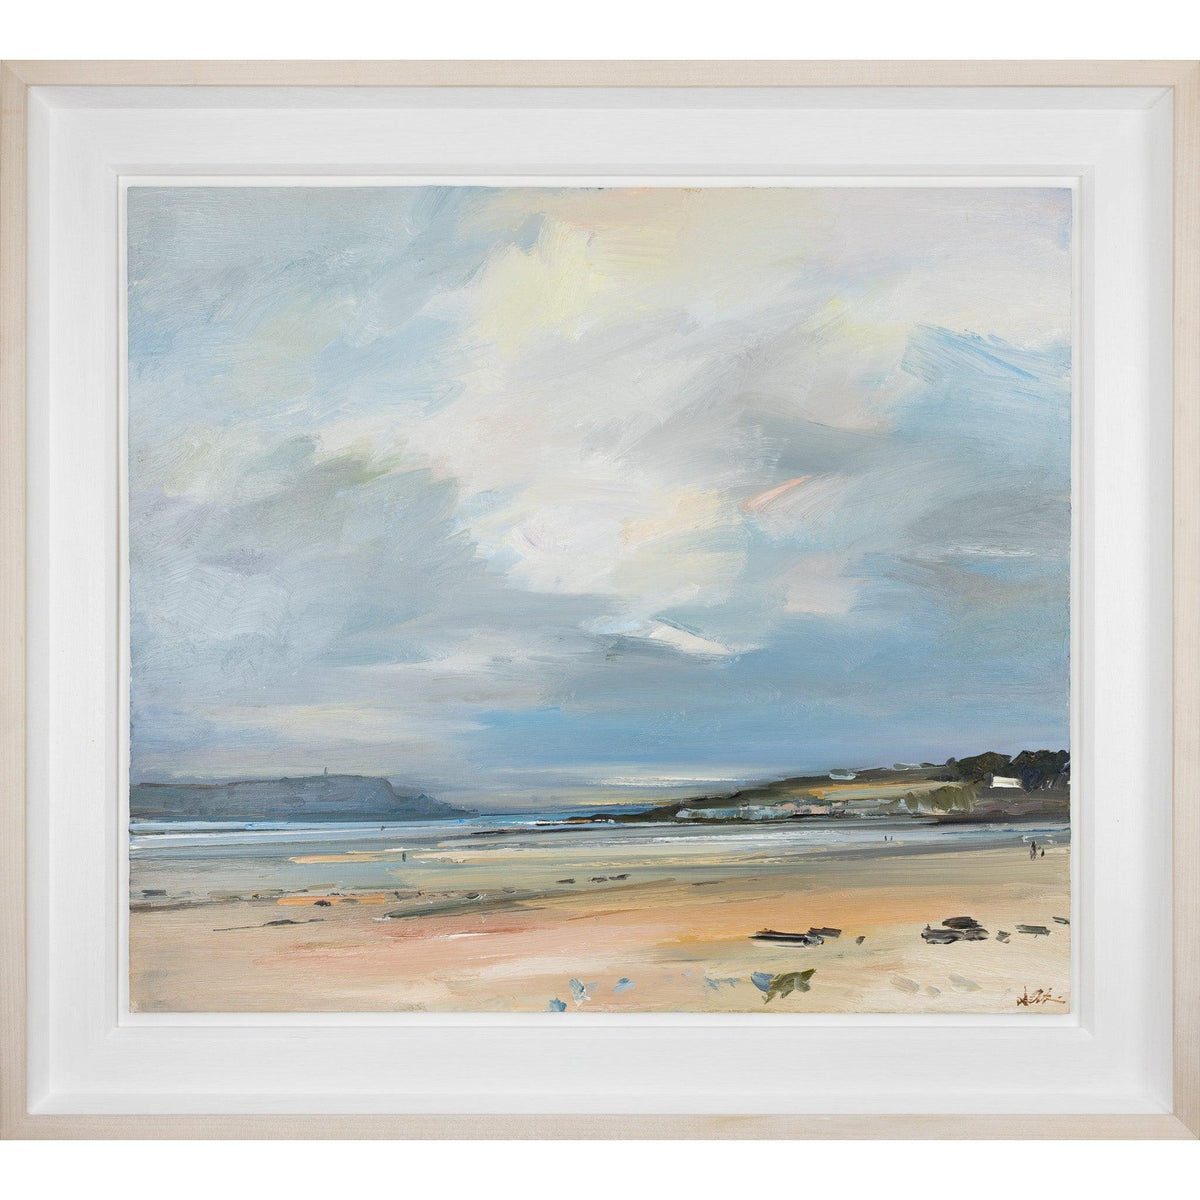 &#39;Evening Light, Daymer Bay&#39; oil on board by David Atkins, fine art, available at Padstow Gallery, Cornwall